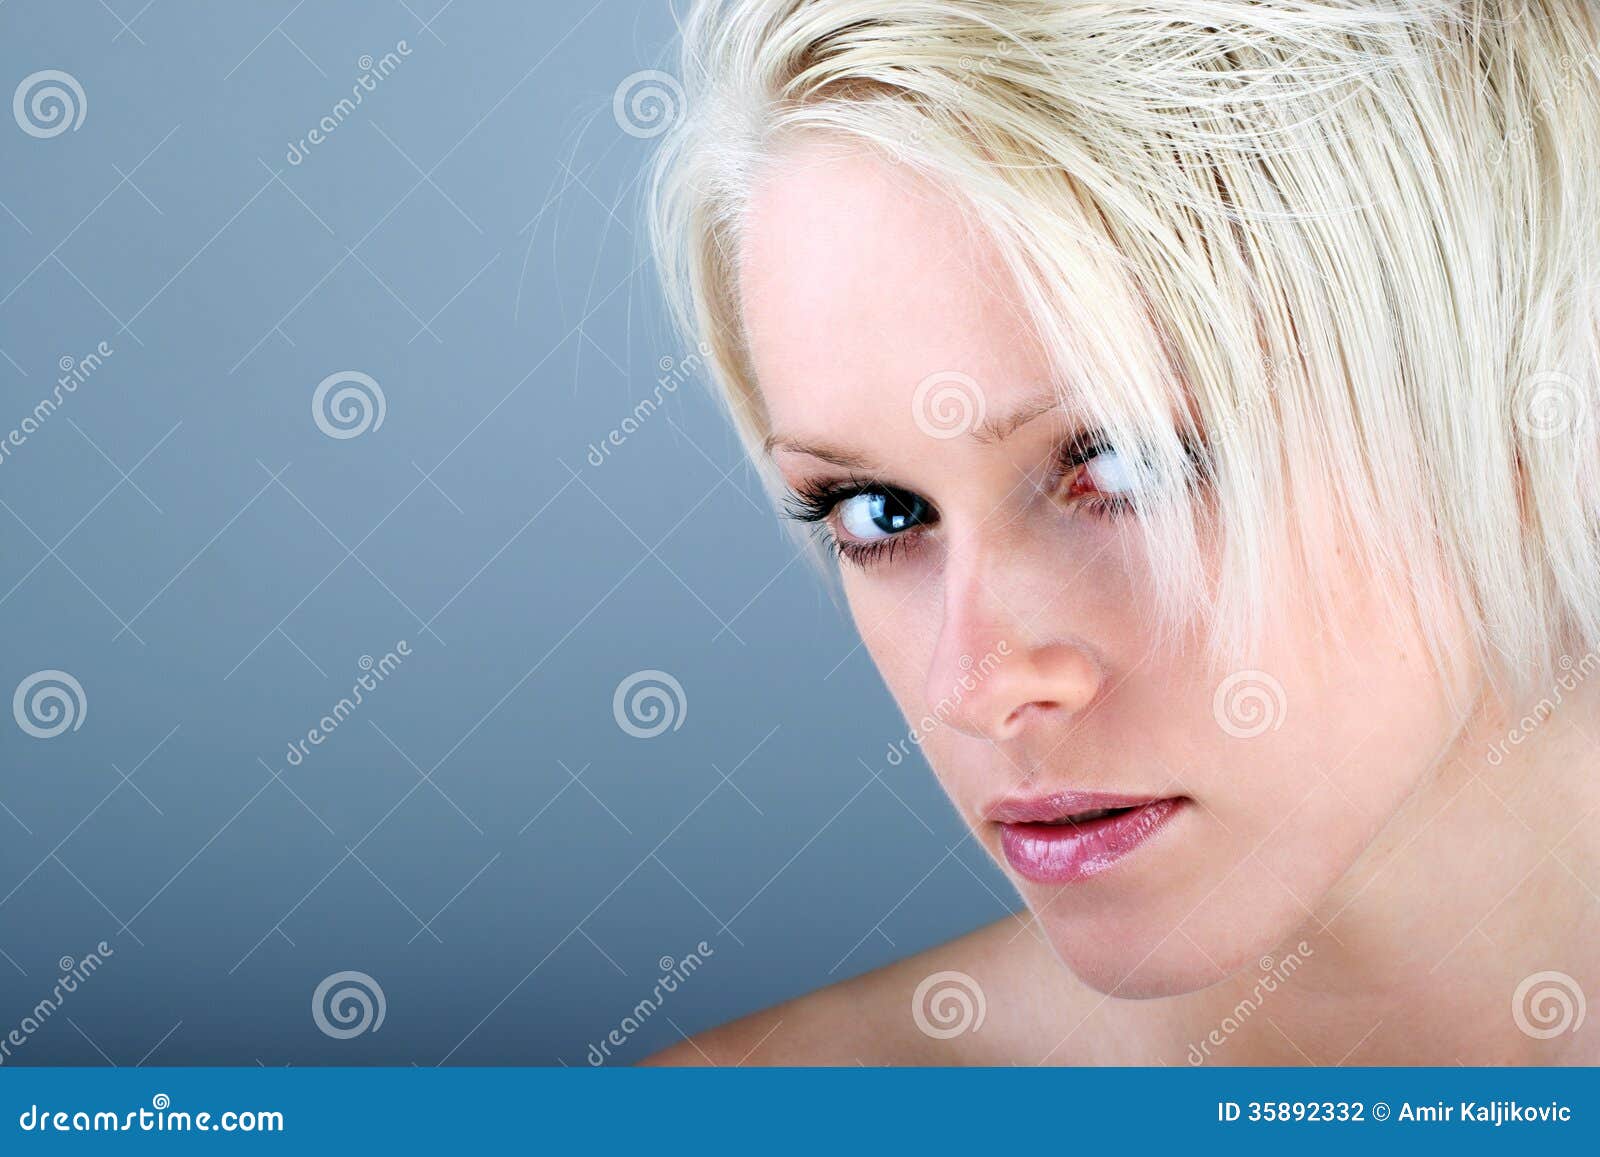 Beautiful Woman With A Wary Look Stock Photography - Image 